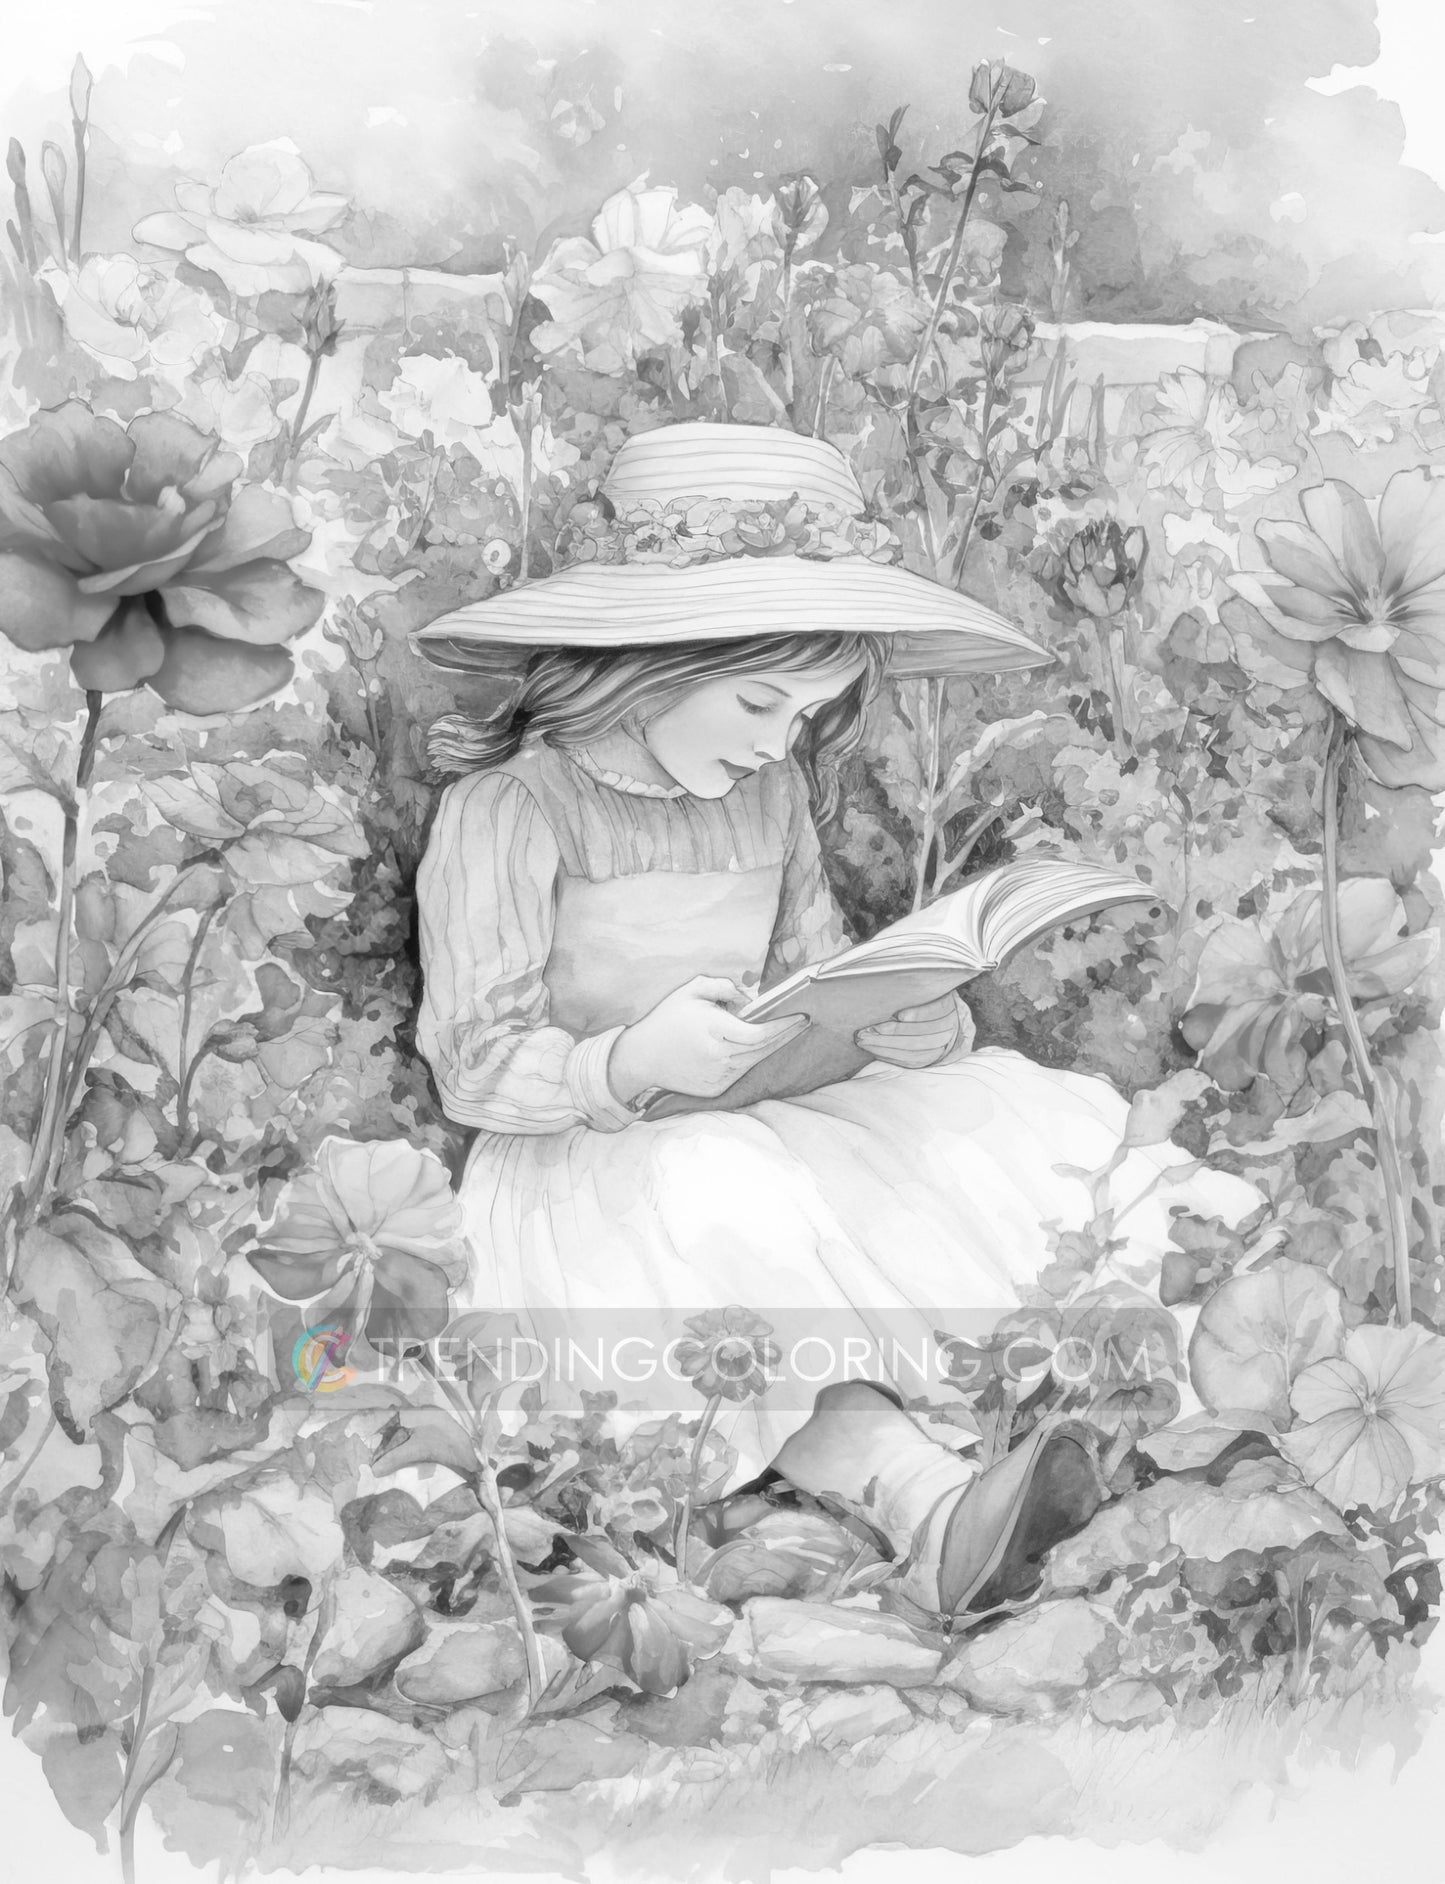 25 Little Girl In Garden Grayscale Coloring Pages - Instant Download - Printable Dark/Light